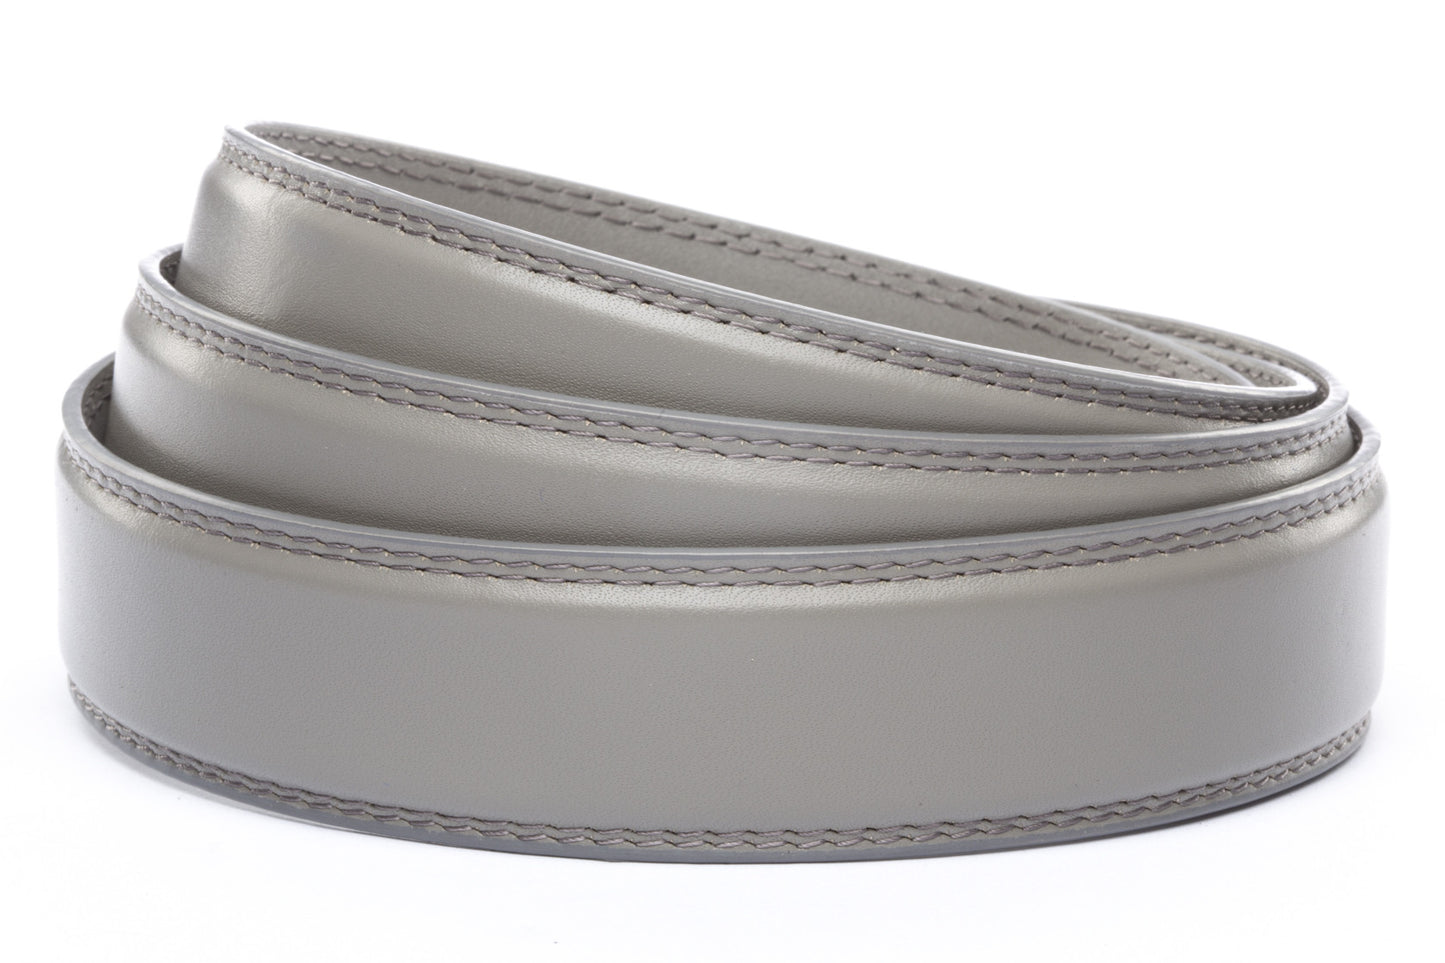 Men's leather belt strap in grey with a 1.25-inch width, formal look